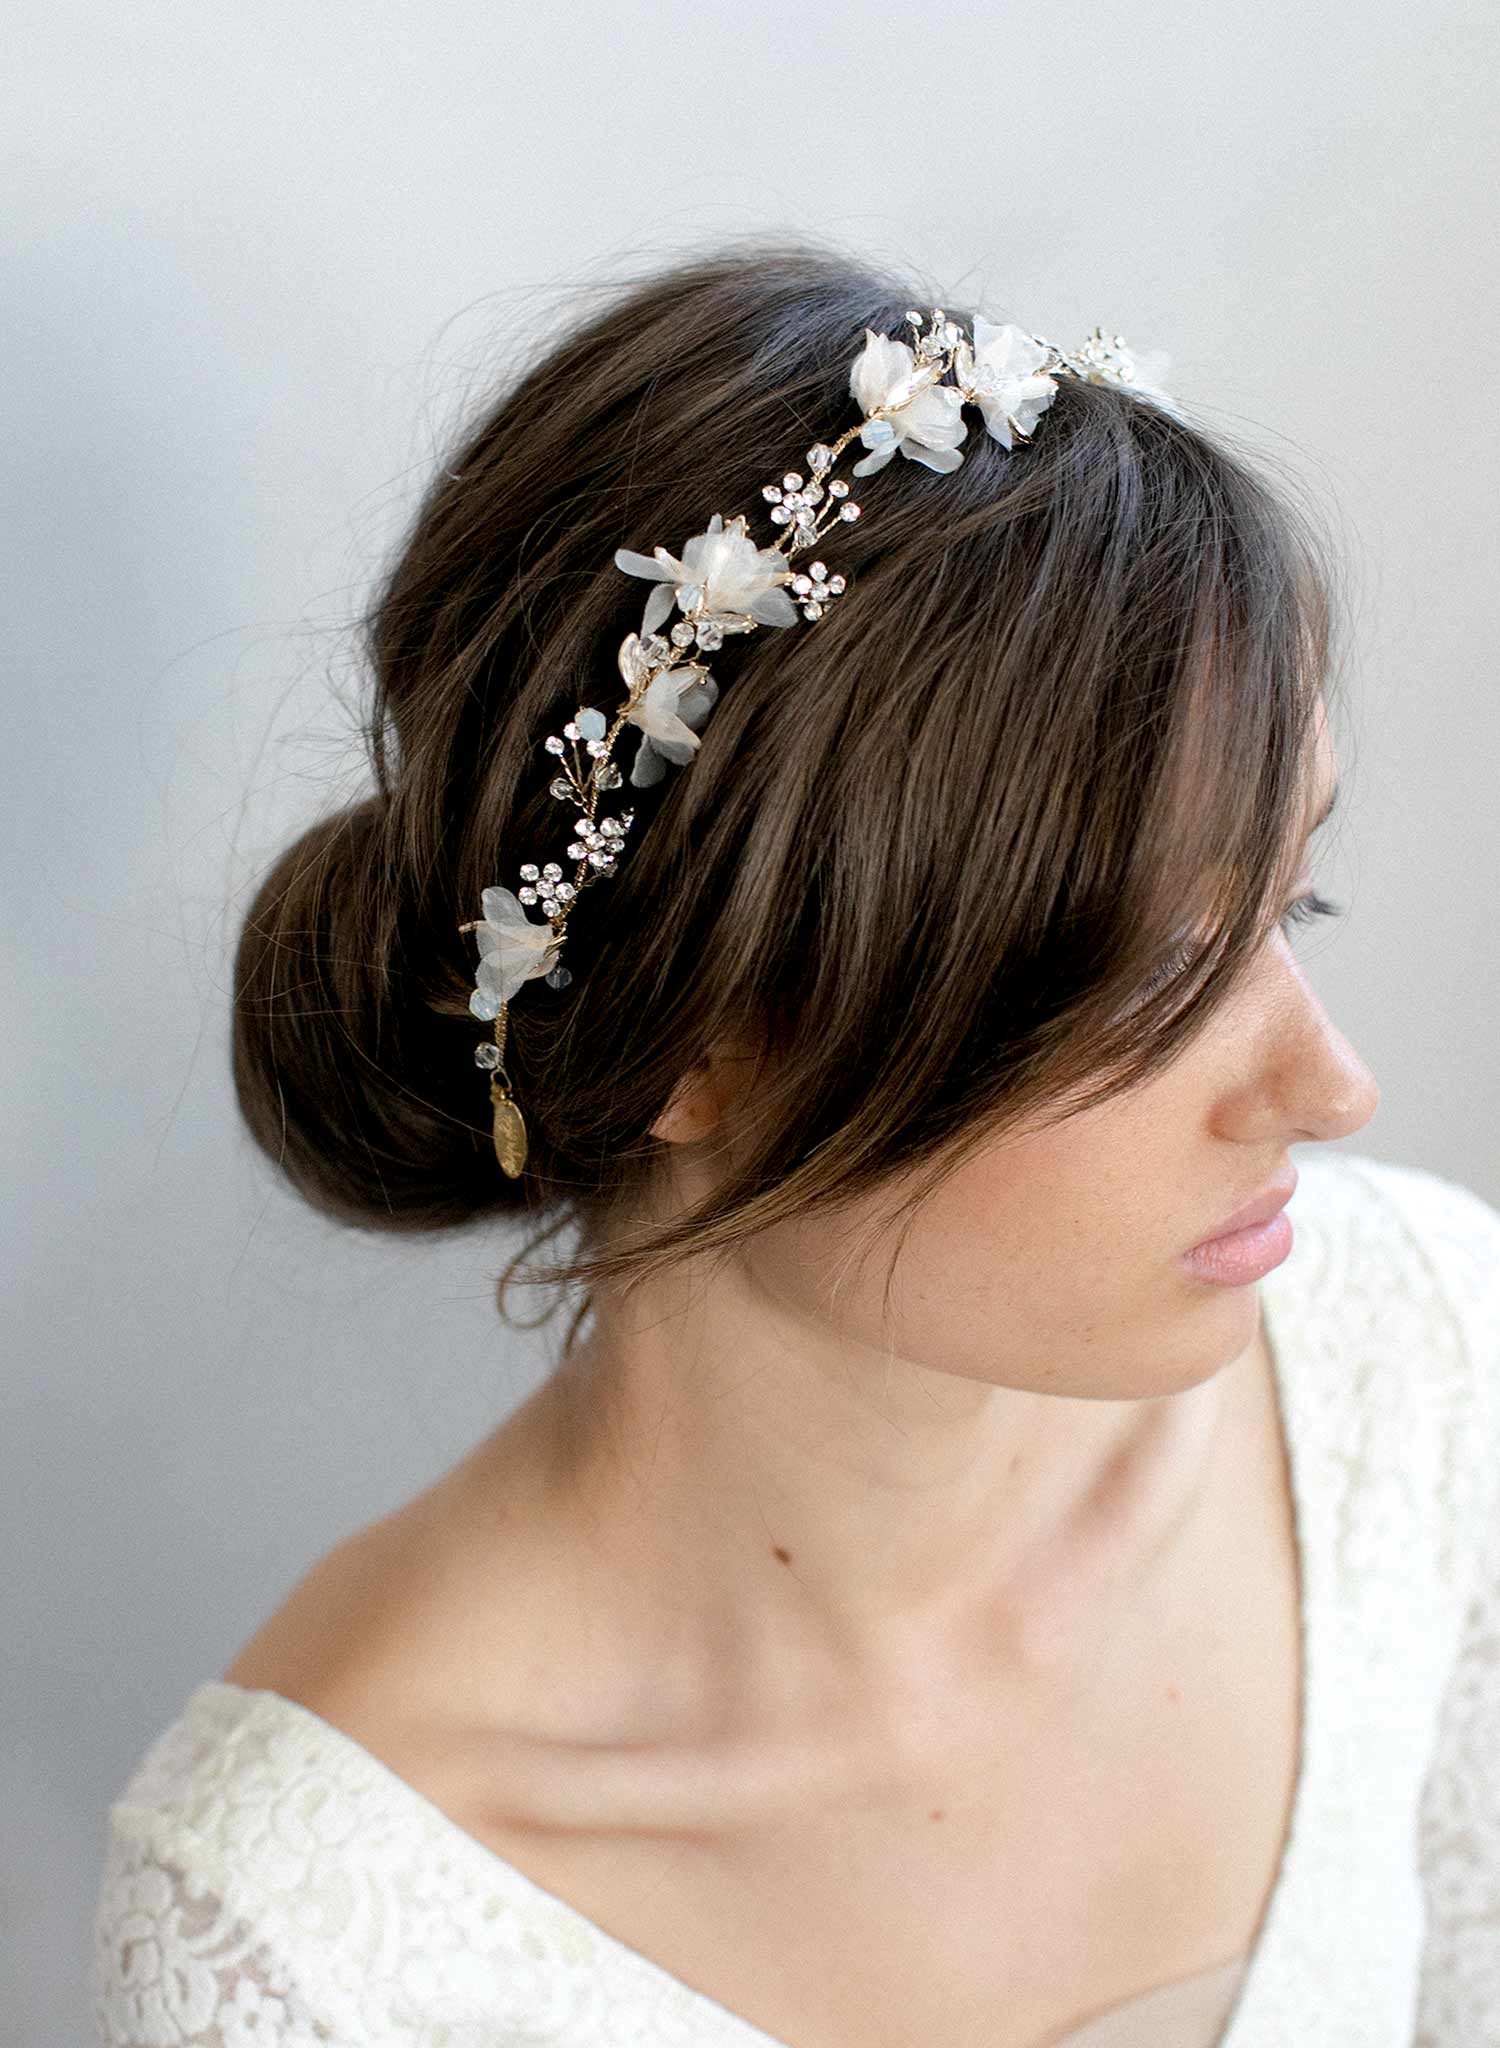 Twigs & Honey Bridal Floral Handmade Clay Hairpins - Pearlescent Blossom Bridal Hair Pin Set of 2 - Style #2175